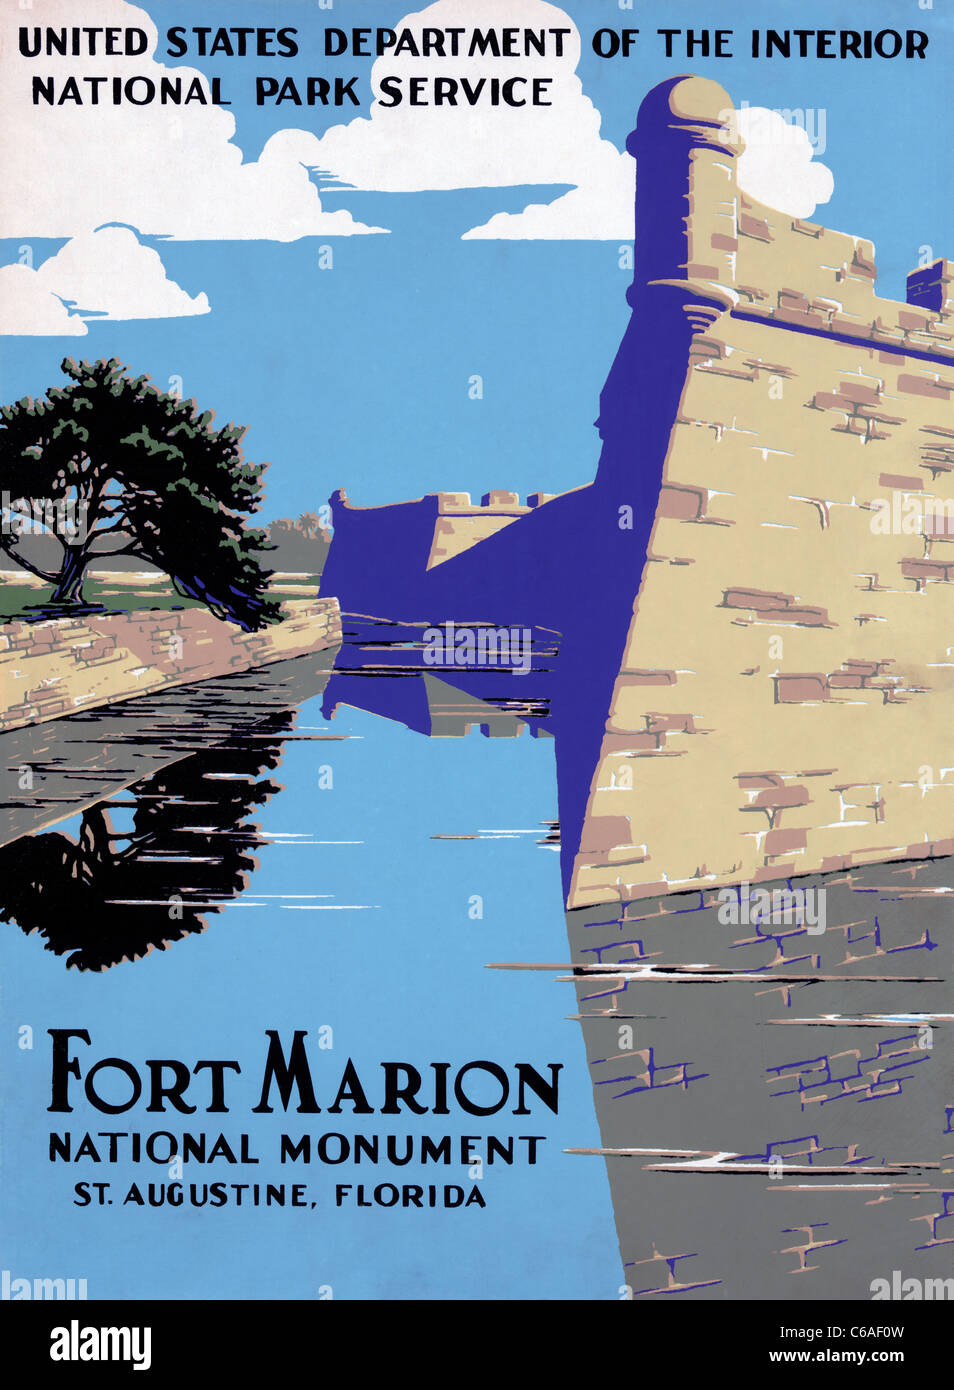 Fort Marion National Monument, St. Augustine, Florida 1938 National Park Service Poster Stock Photo